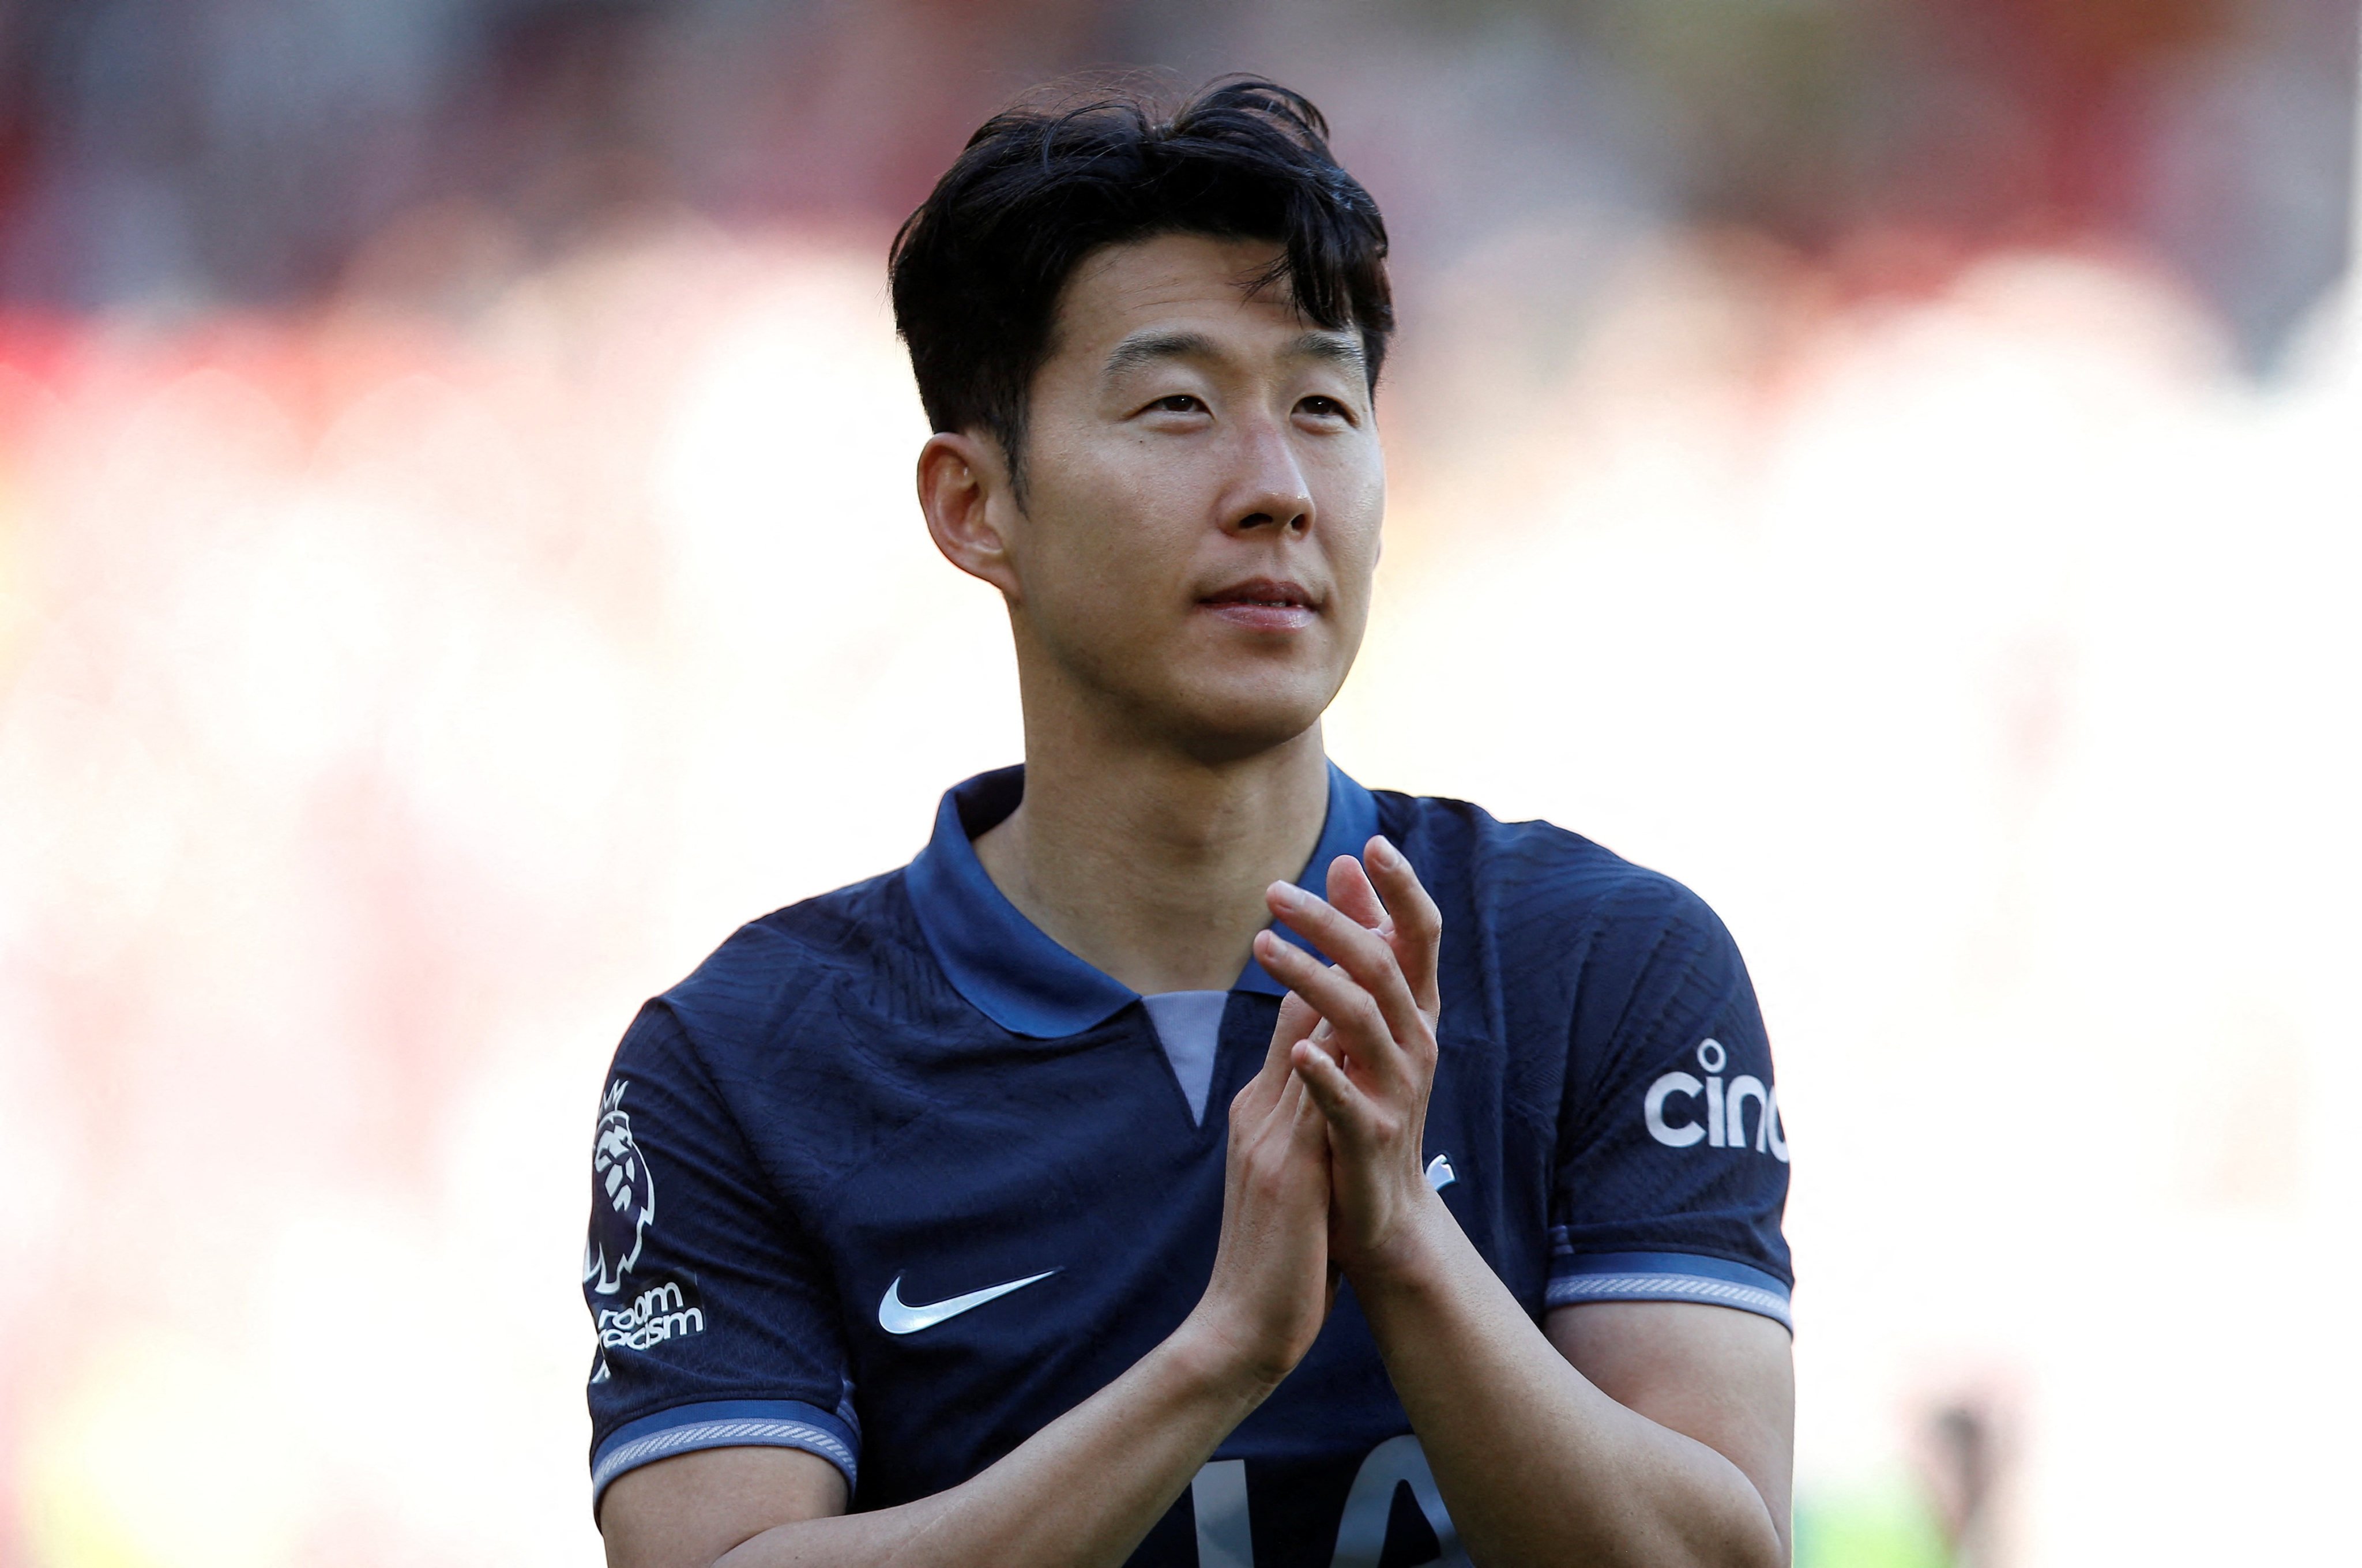 Son Heung-min’s father has denied corporal punishment was used at his academy after being sued. Photo: Reuters